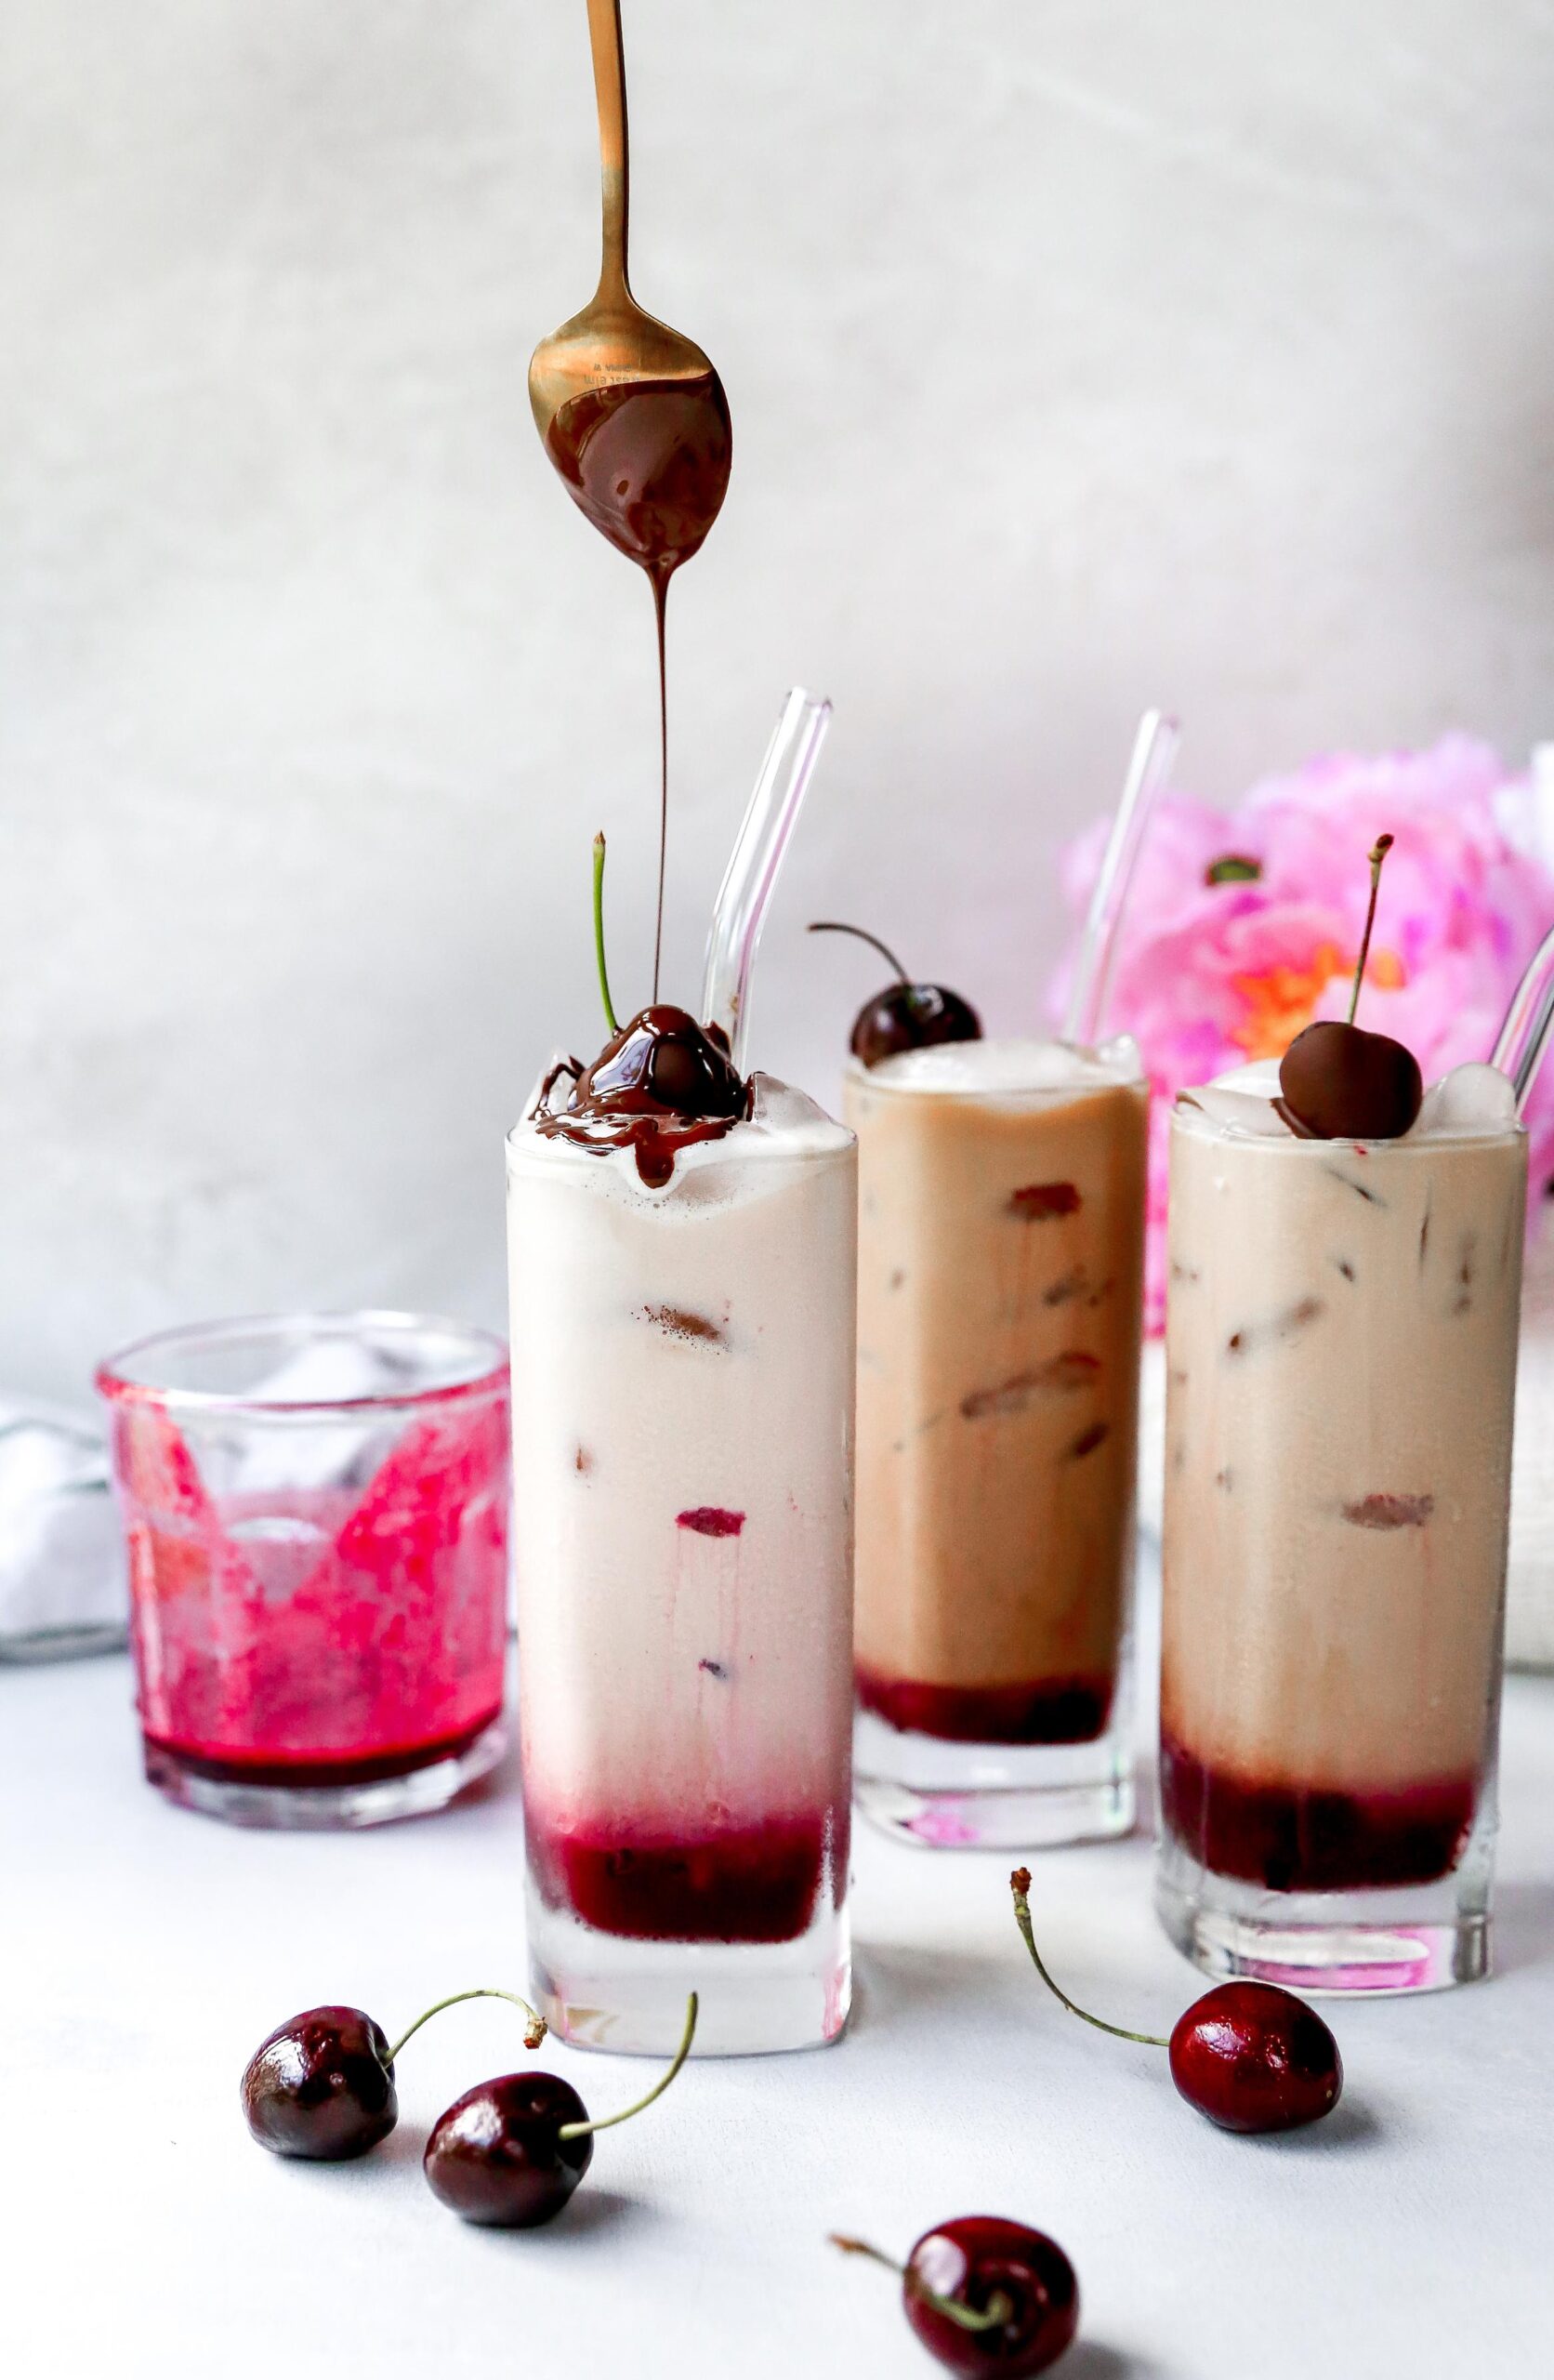  Sweet and Sinful: Indulge in Our Chocolate Cherry Coffee Mix